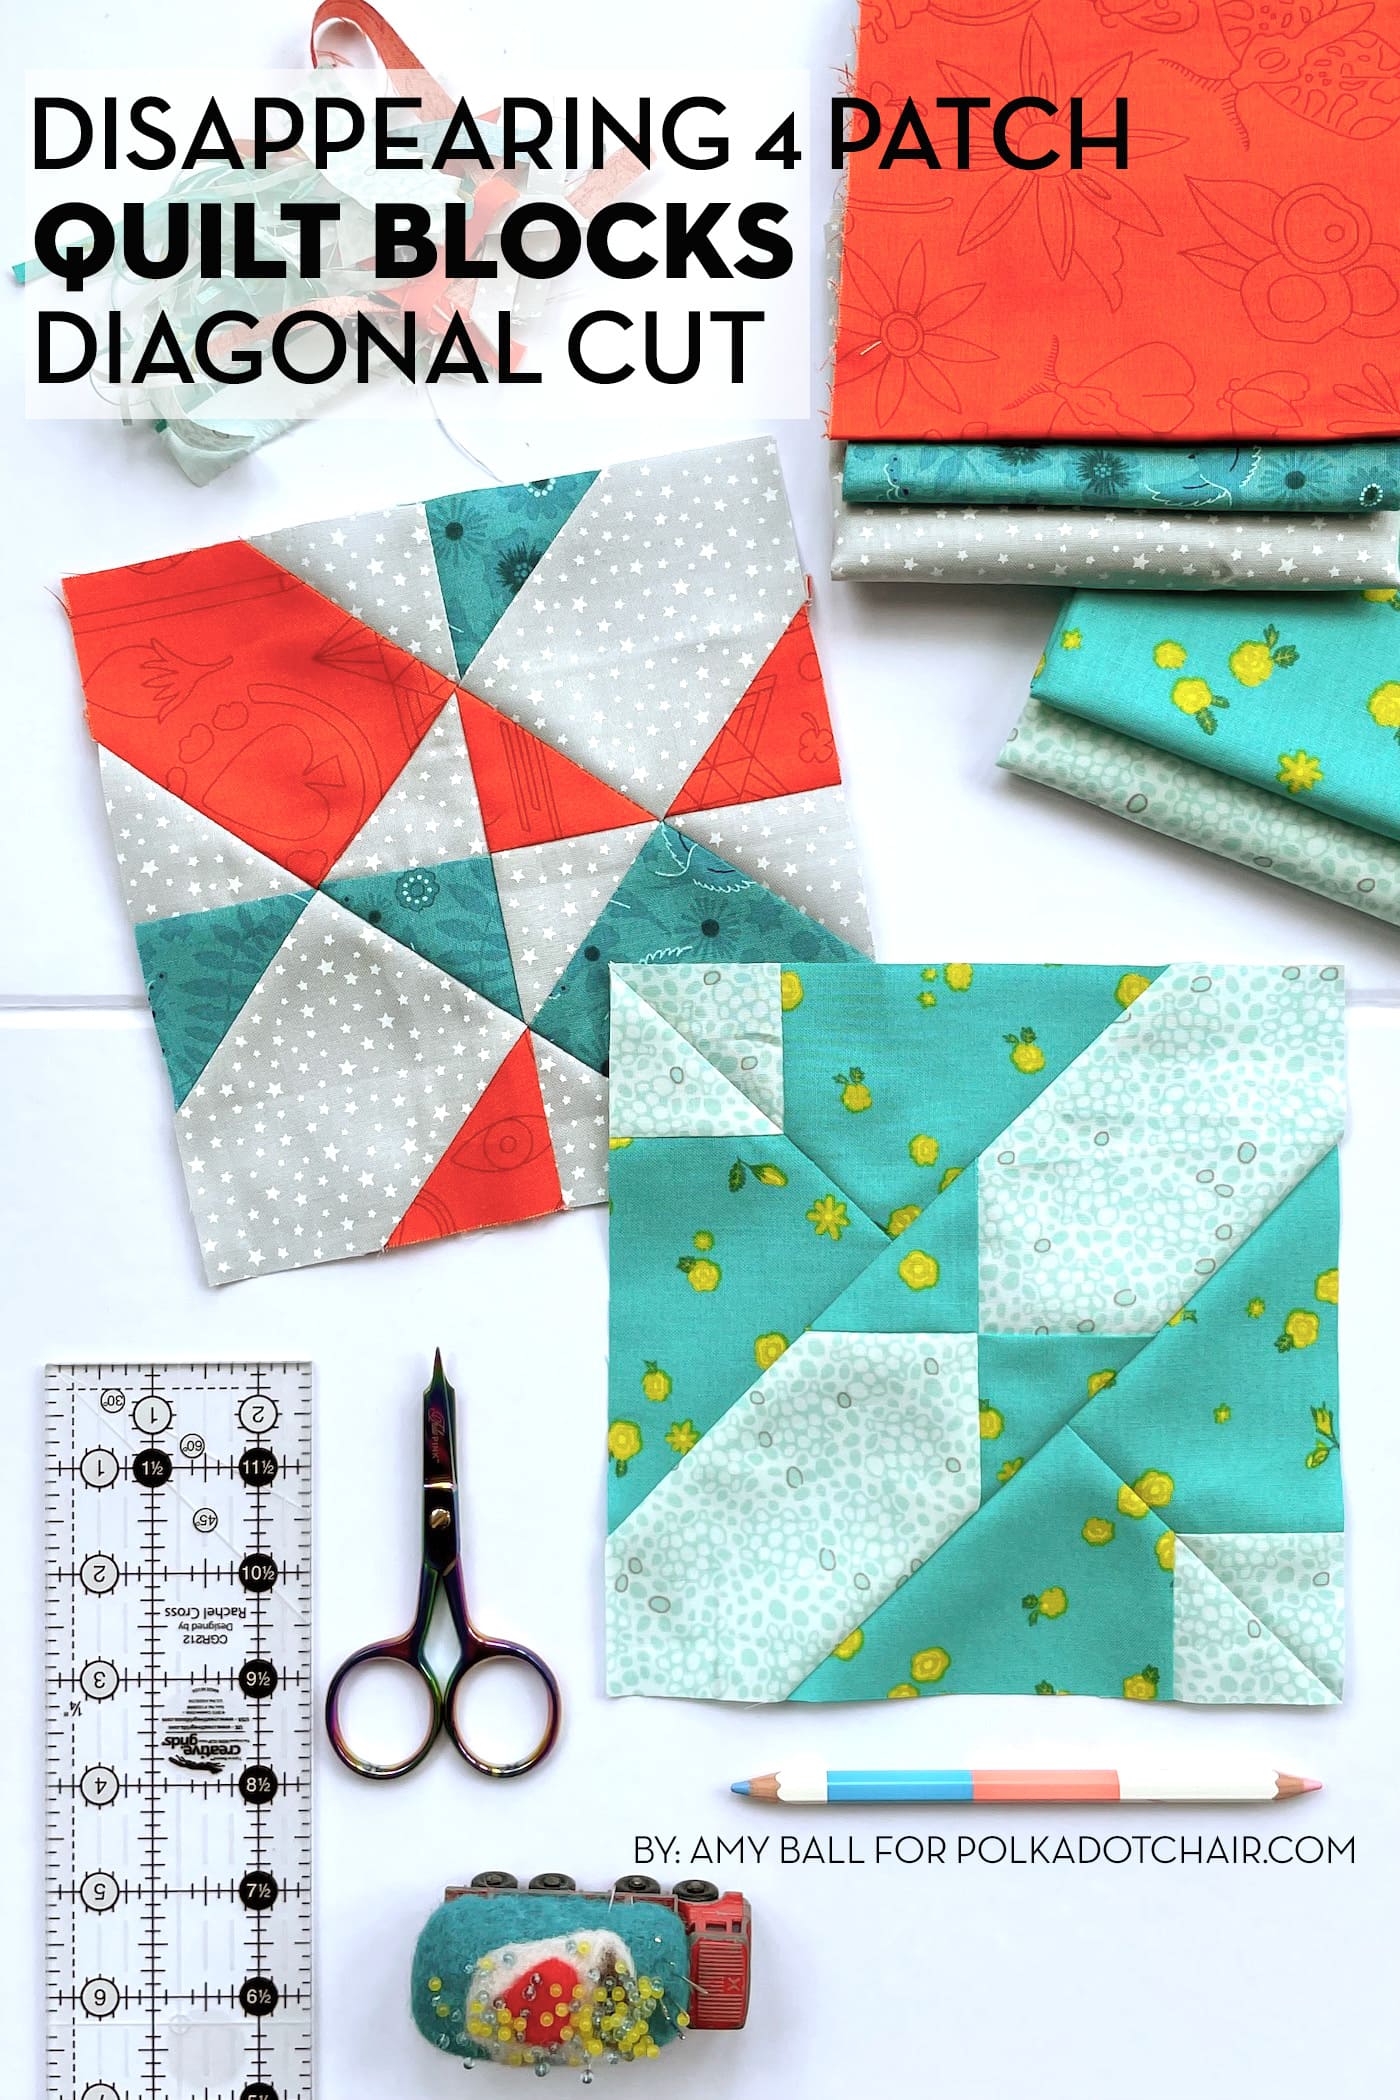 Materials Needed For A 4 Patch Quilt Block